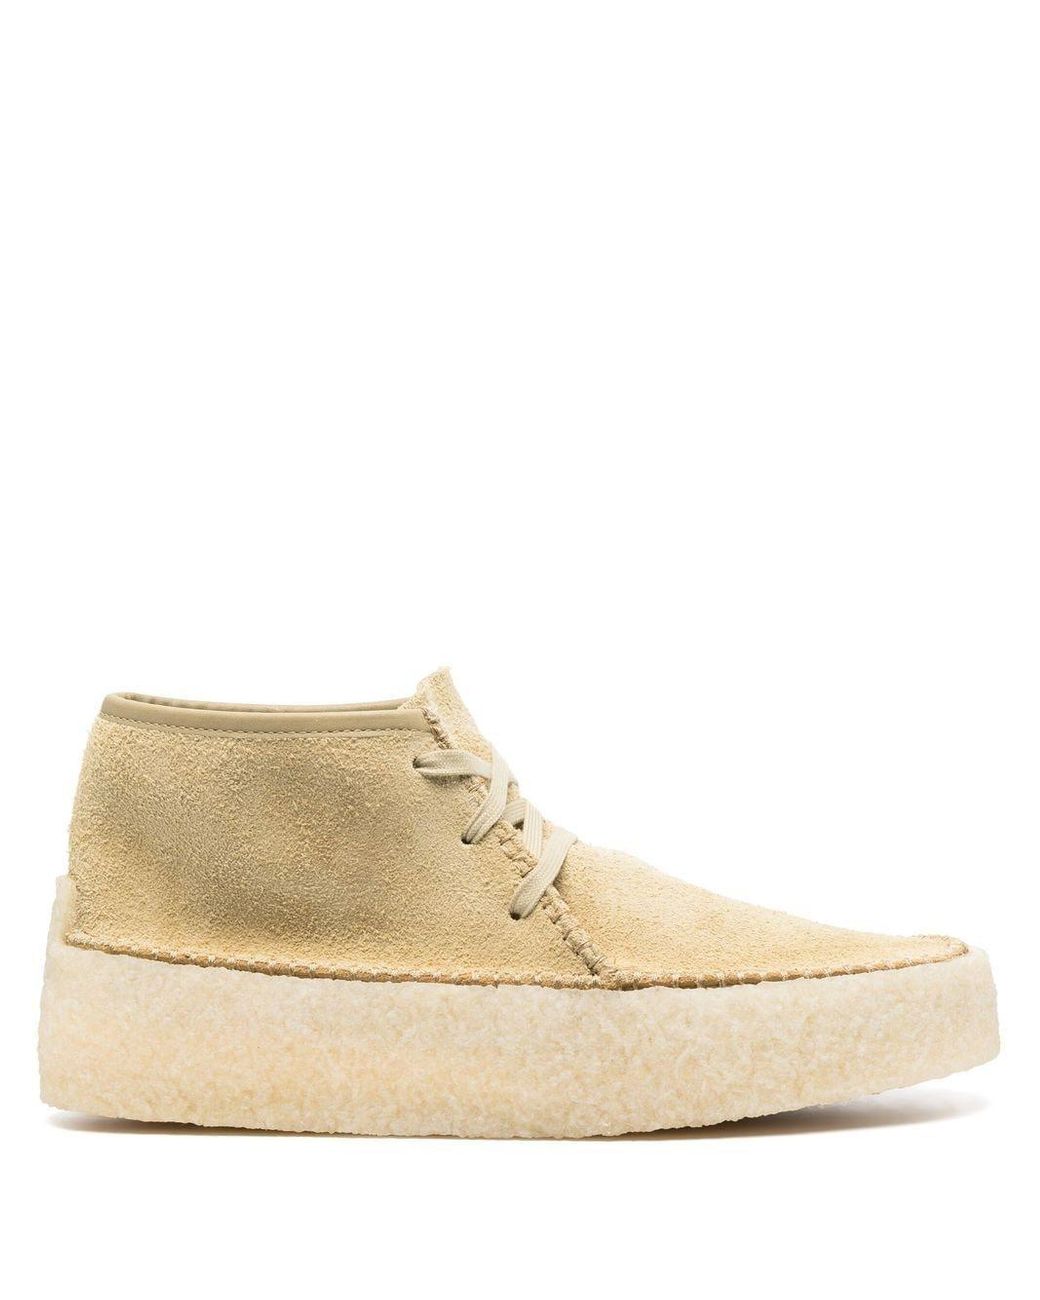 Clarks Caravan Suede Lace-up Shoes in Natural for Men | Lyst